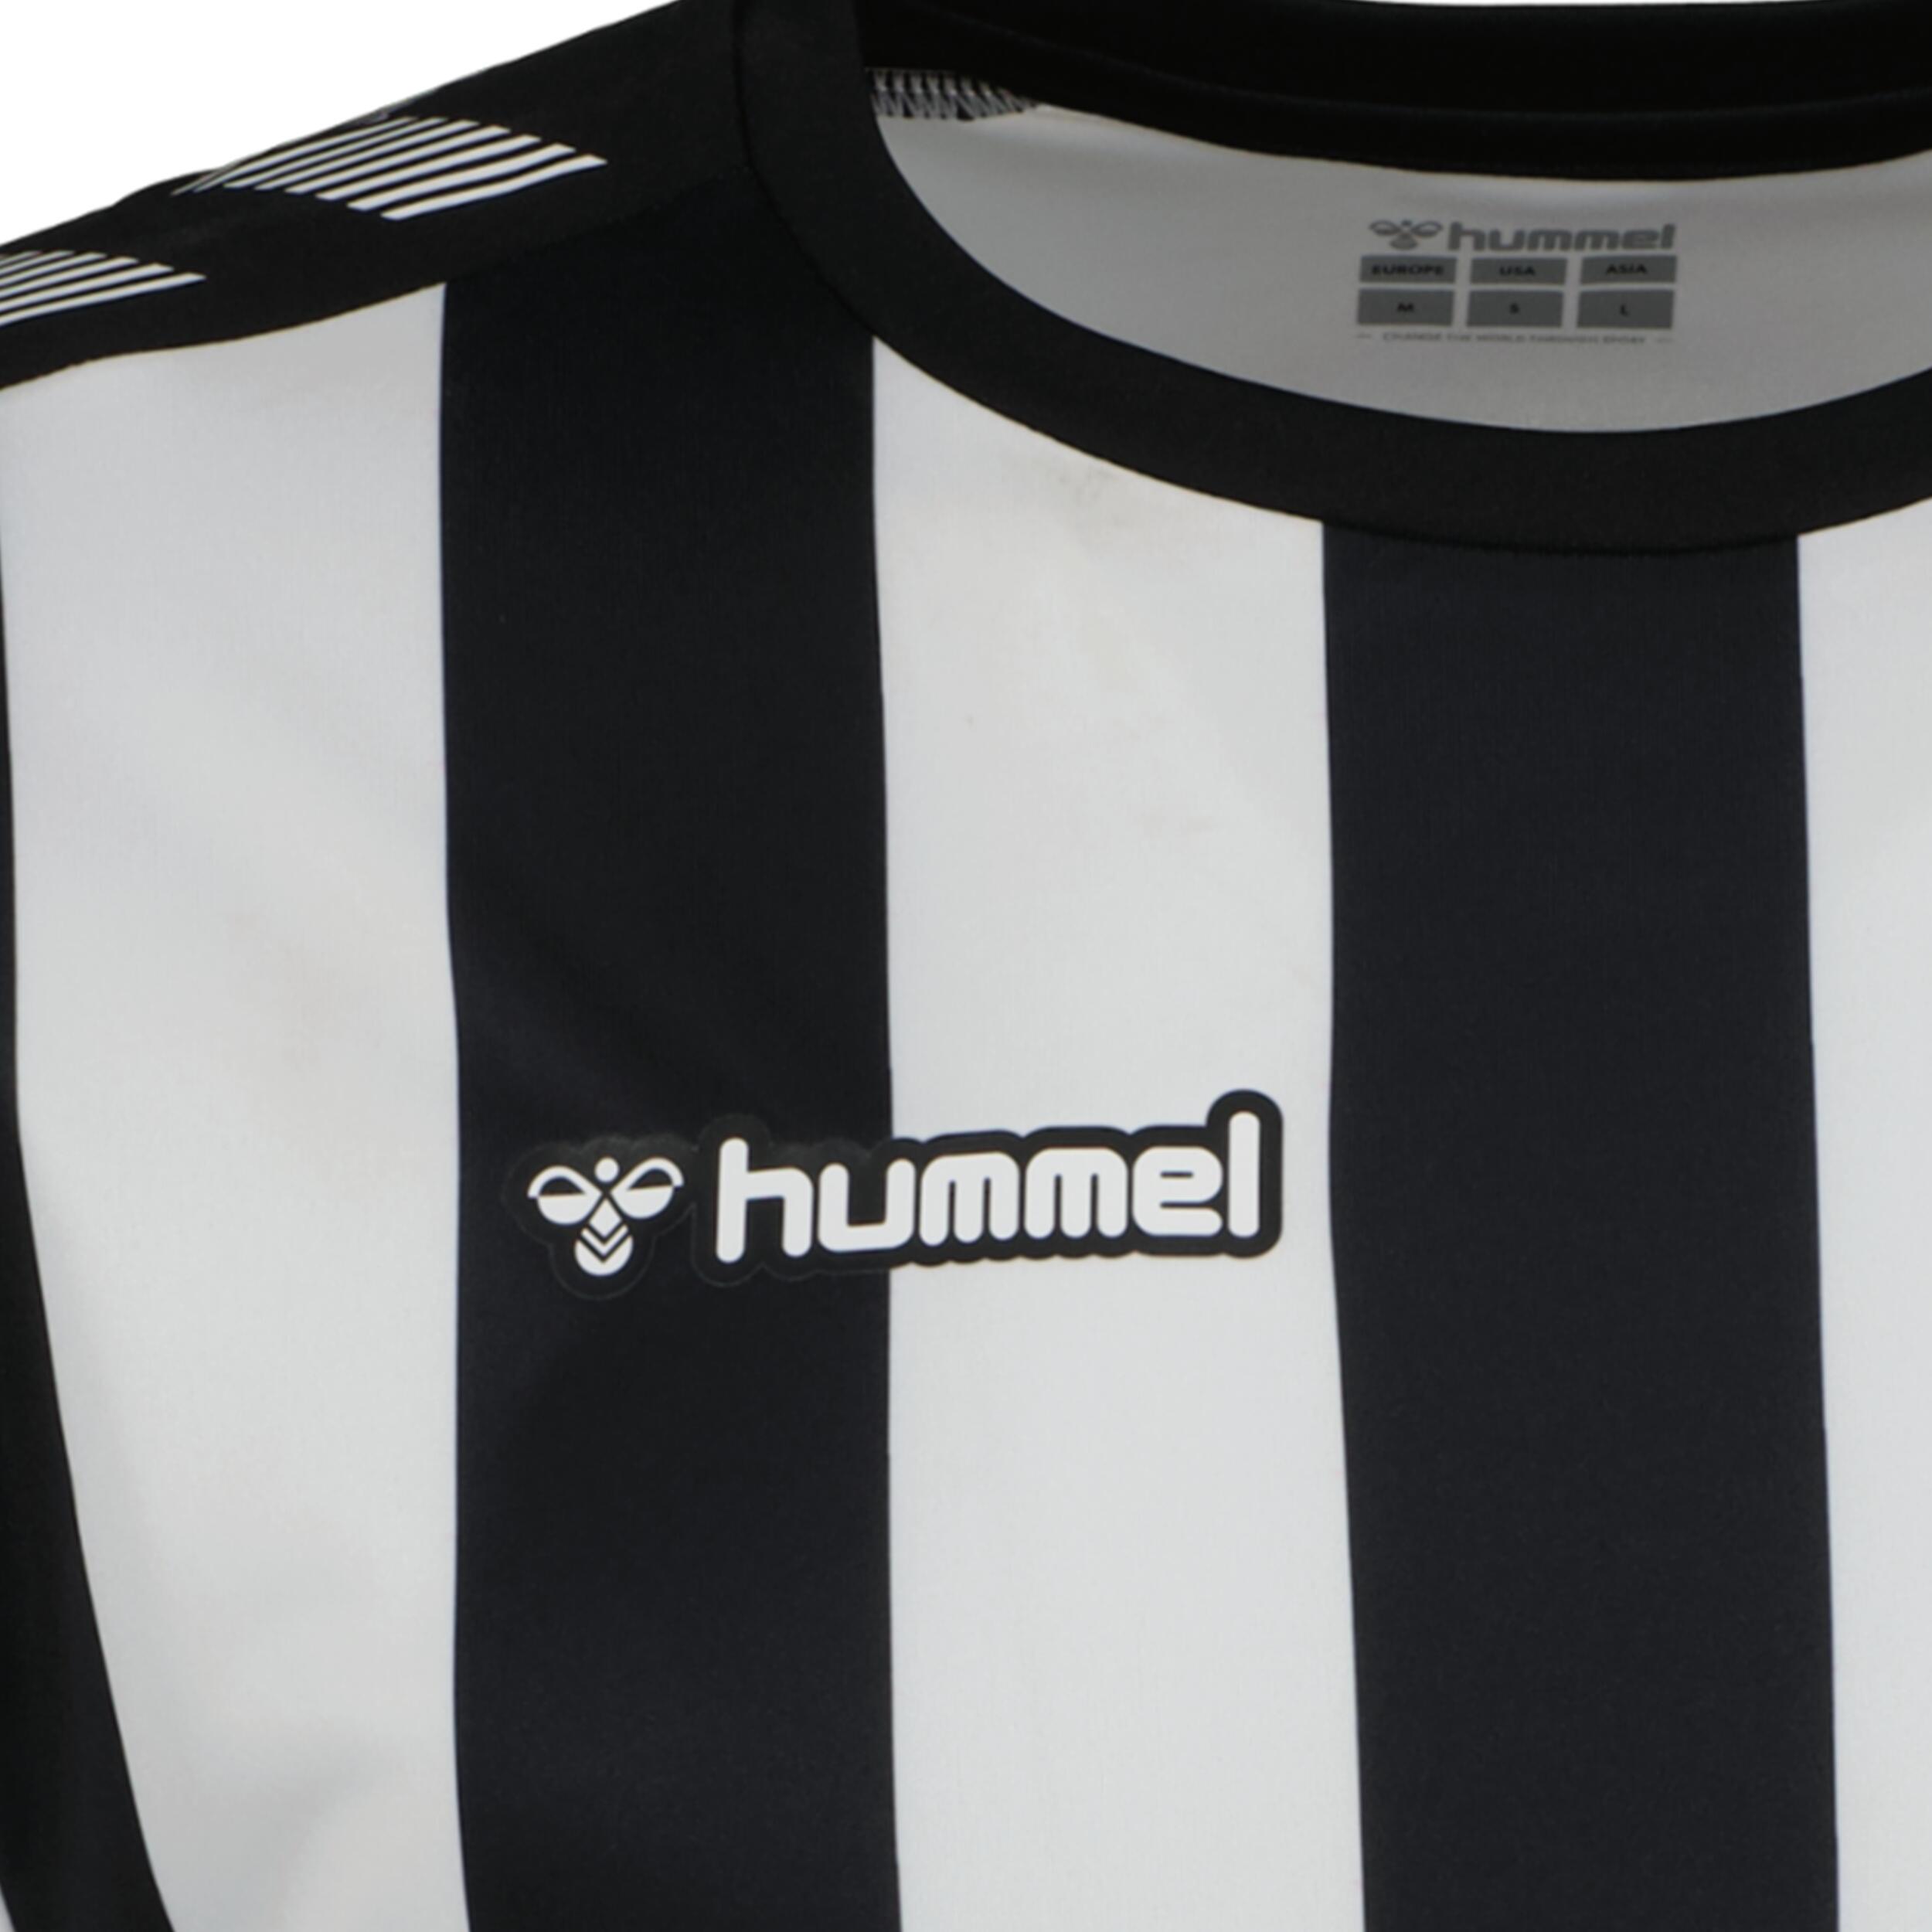 Stripe jersey for kids, great for football, in black/white 3/3